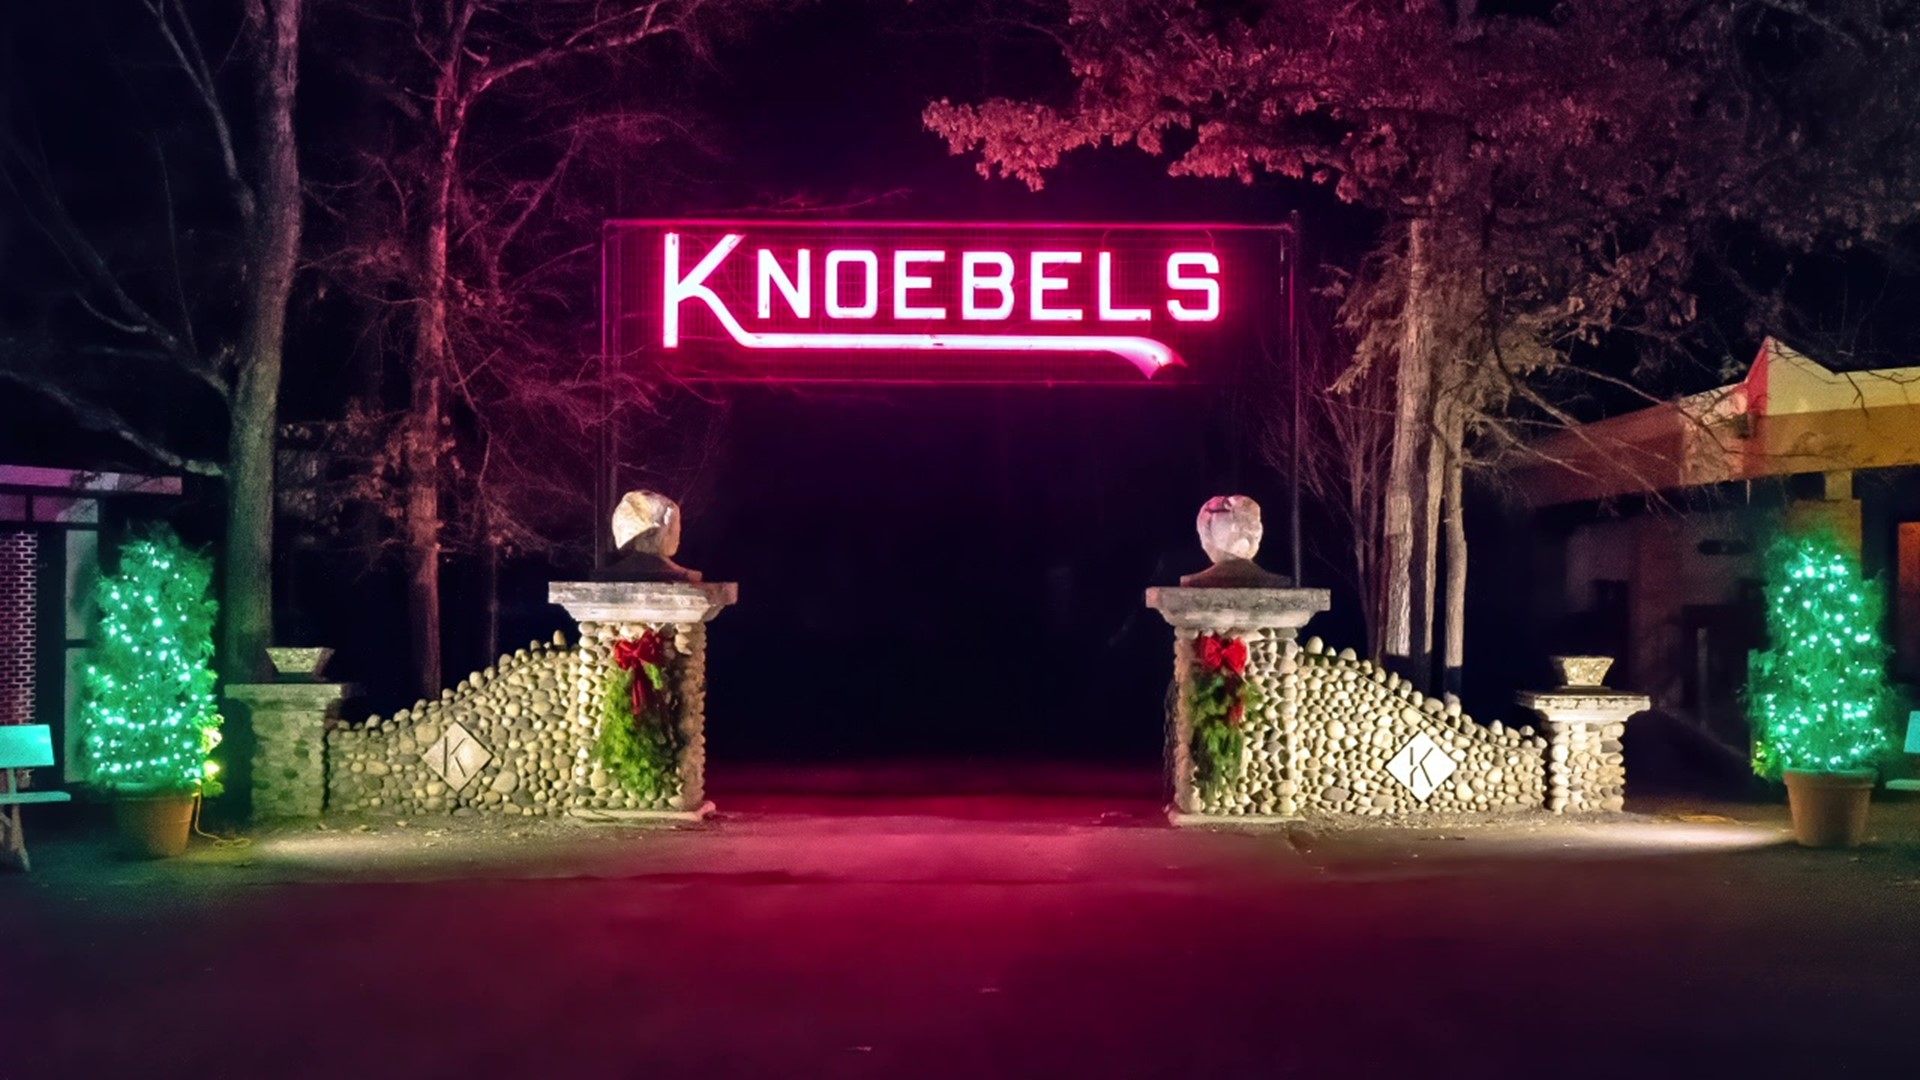 Thanksgiving is only two days away, but employees at Knoebels Amusement Resort are already in the Christmas spirit.